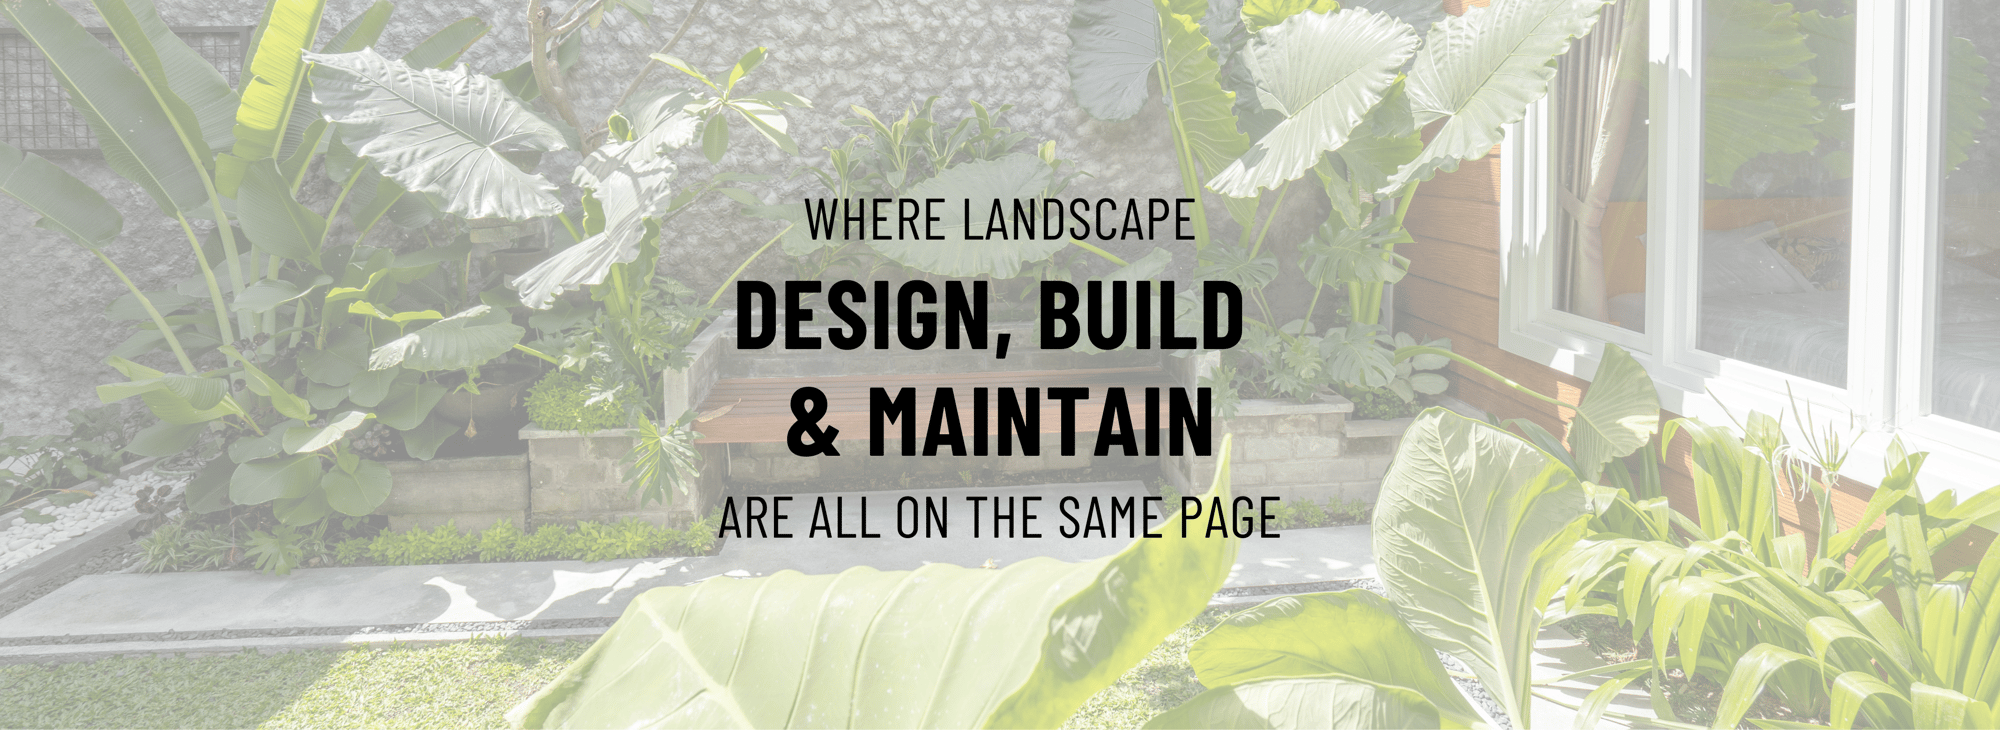 SYNKD, Where Landscape Design, Build & Maintain are all on the same page